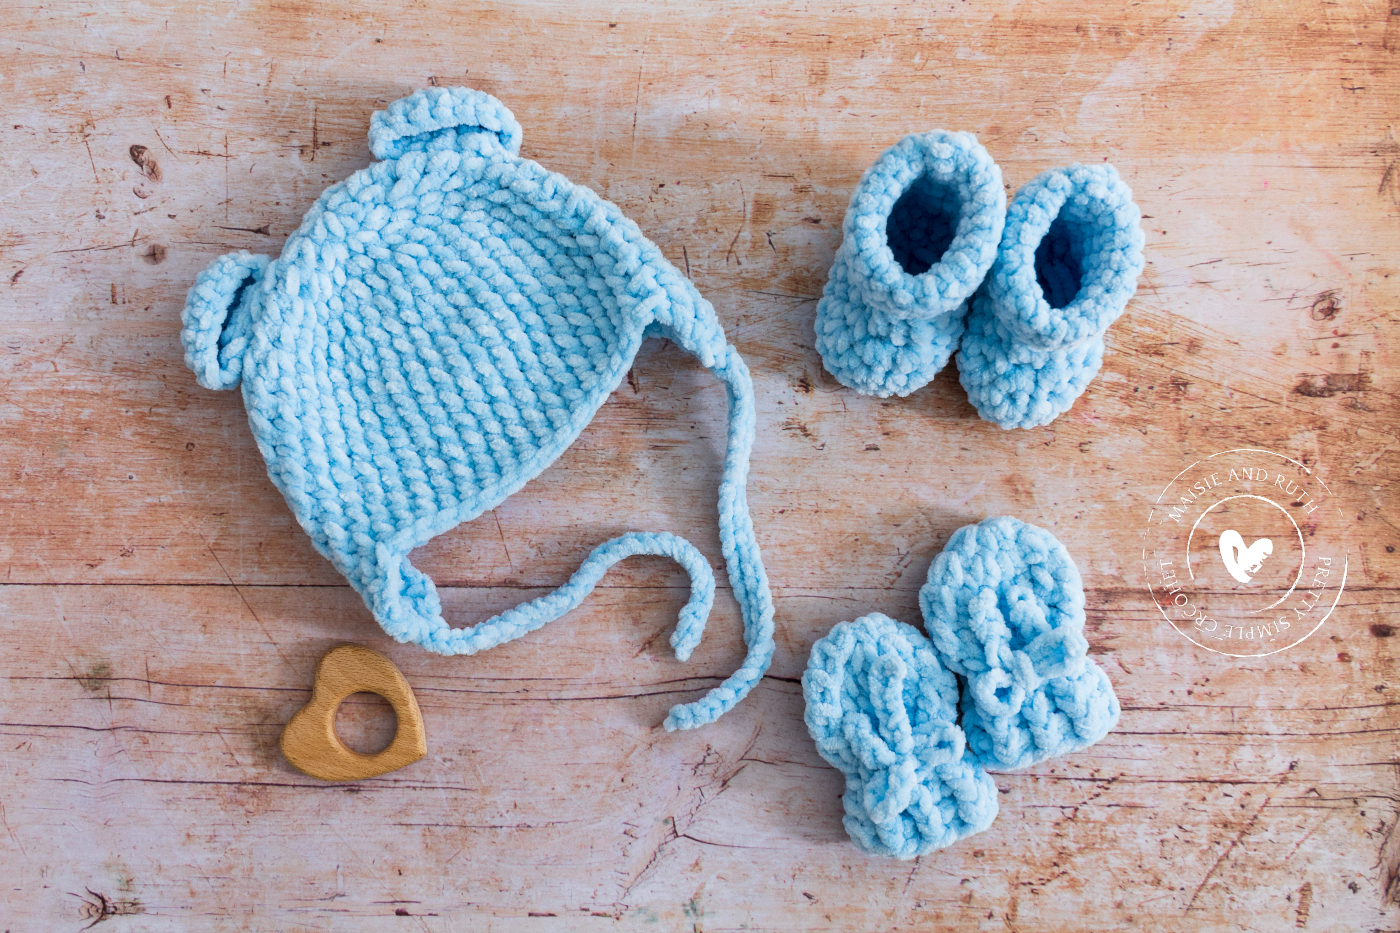 Crochet Baby Mittens with blue hat and booties